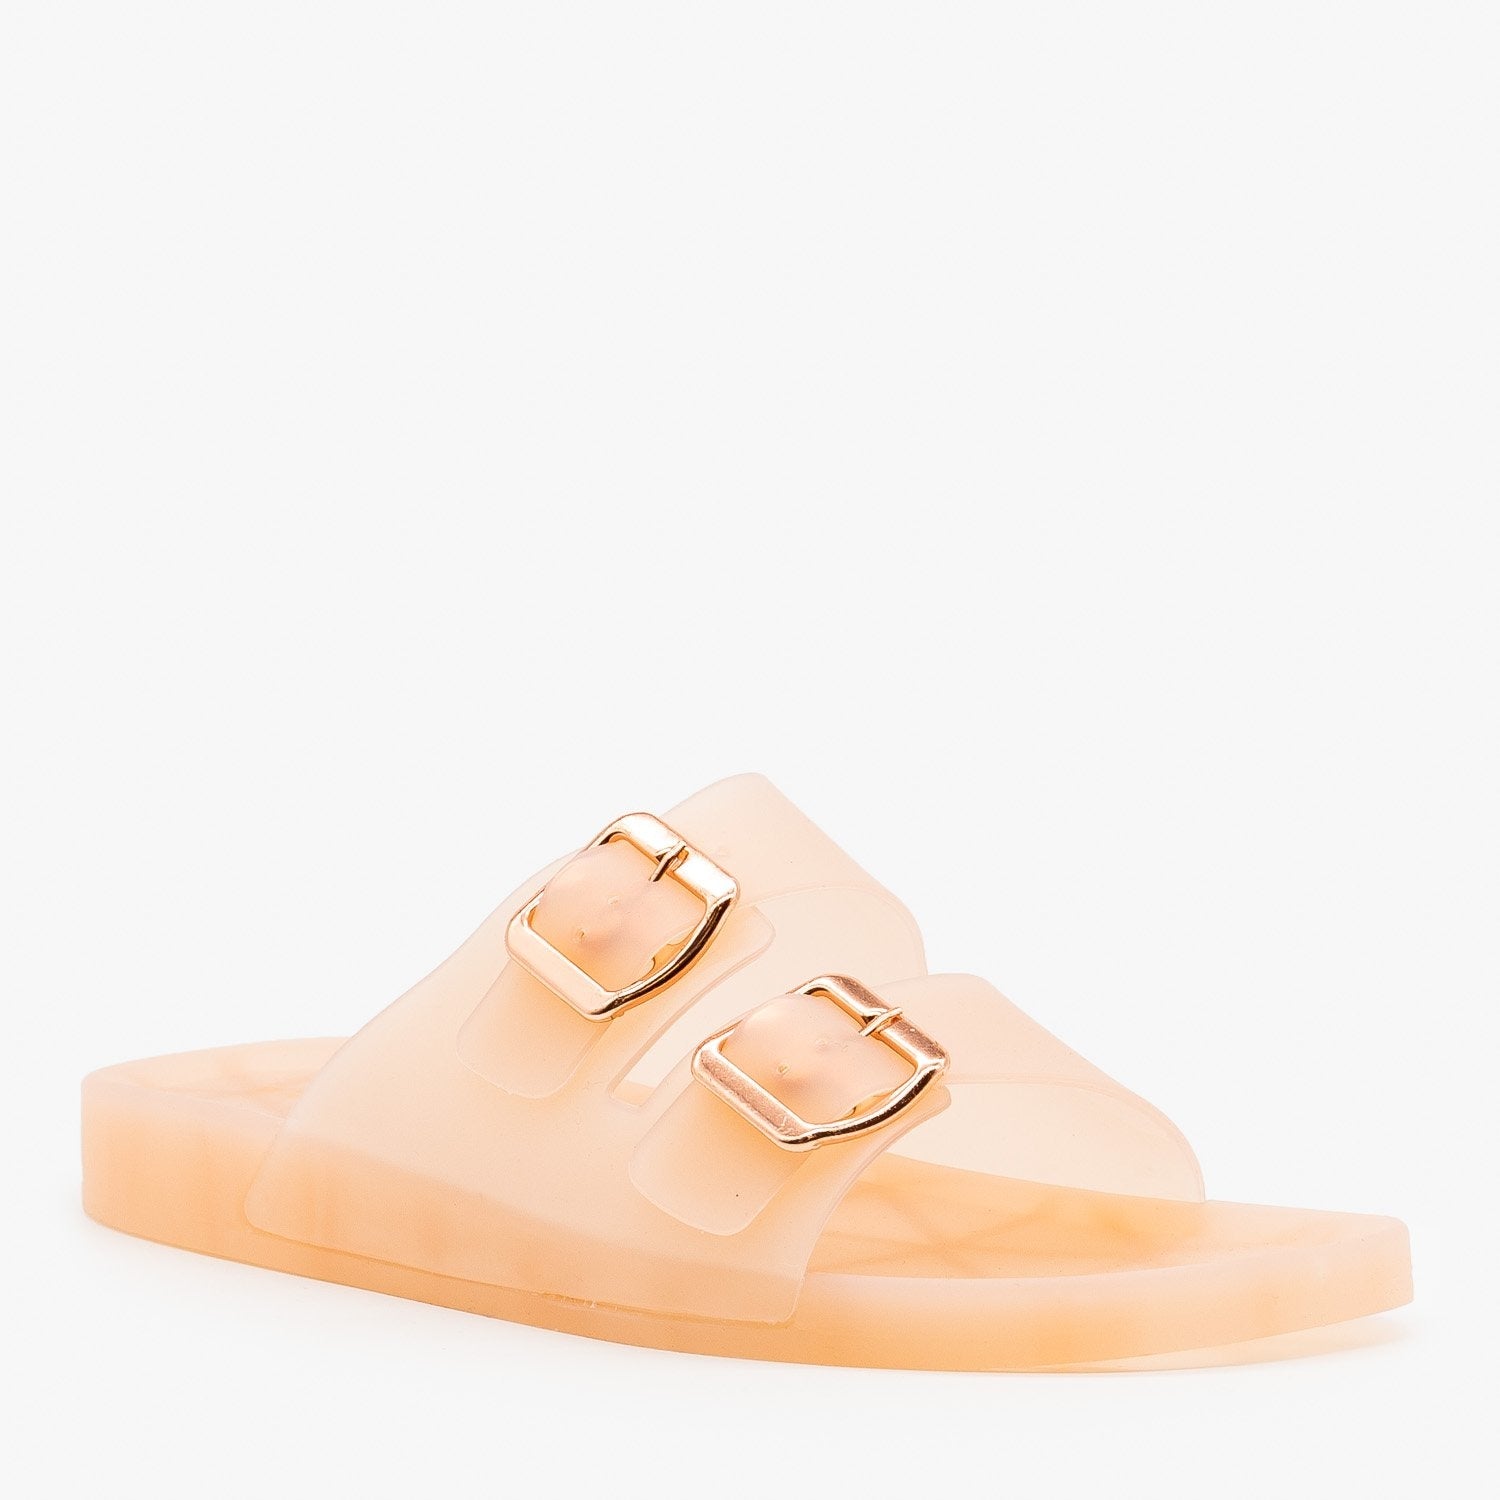 jelly buckle sandals